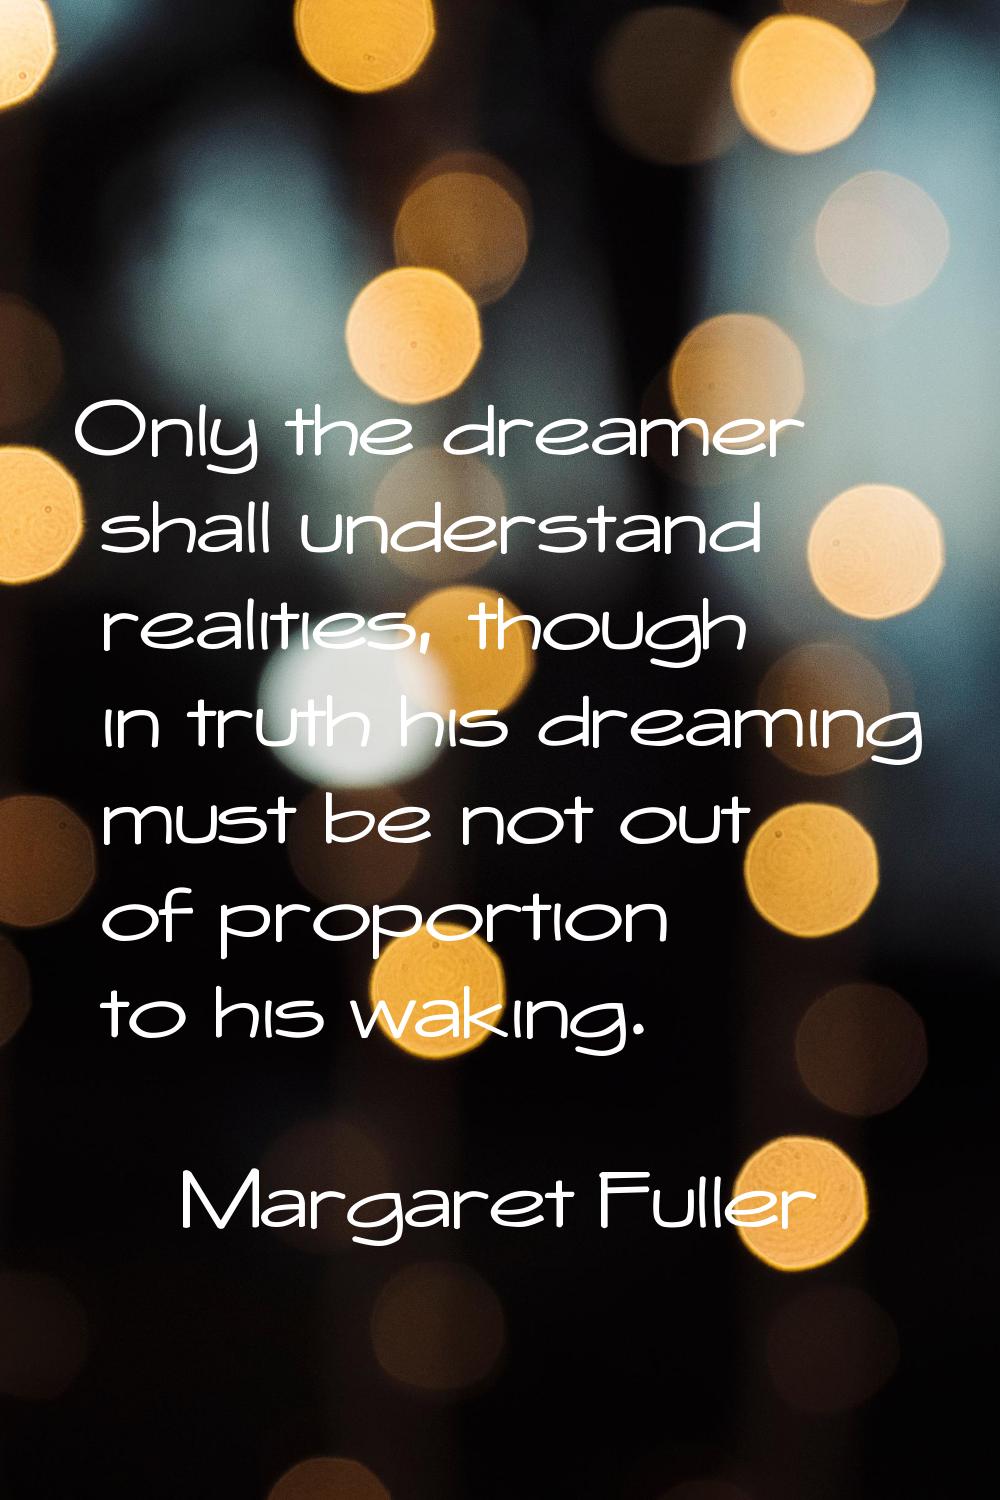 Only the dreamer shall understand realities, though in truth his dreaming must be not out of propor